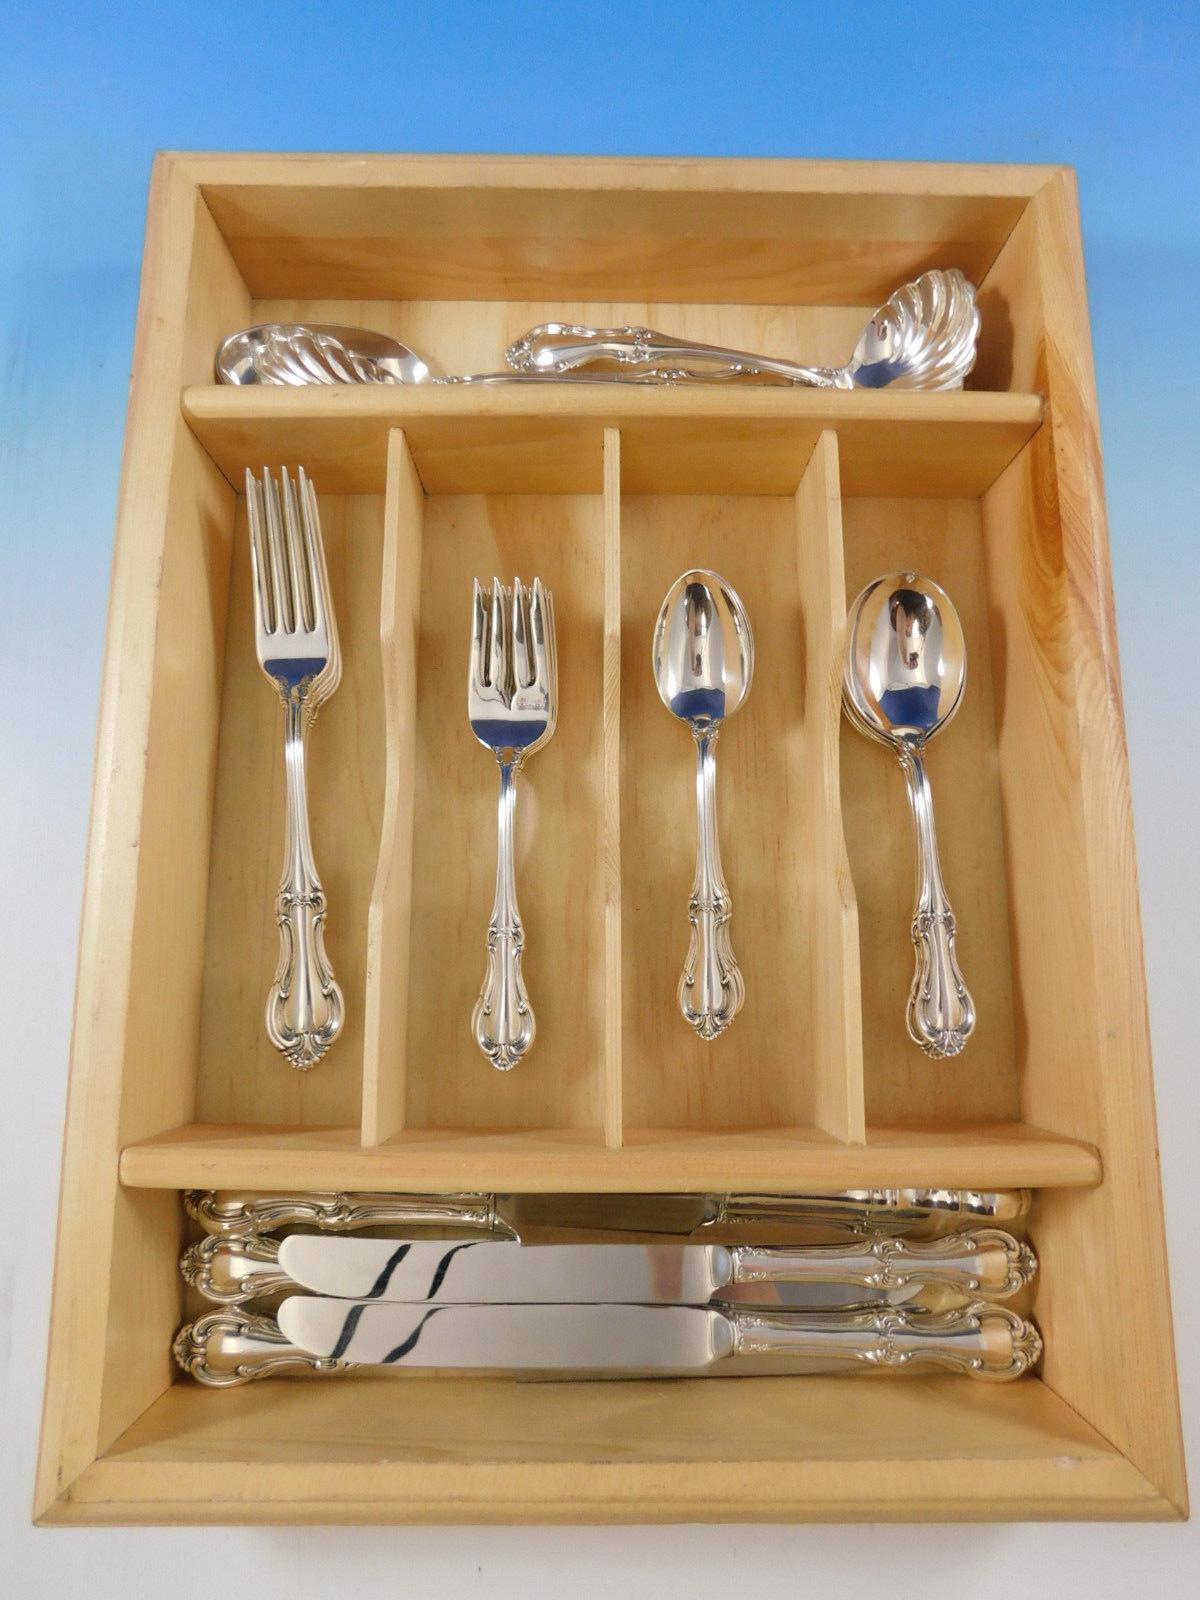 Joan of Arc by International sterling silver flatware set, 33 pieces. Great starter set! This set includes:

6 knives, 9 1/8